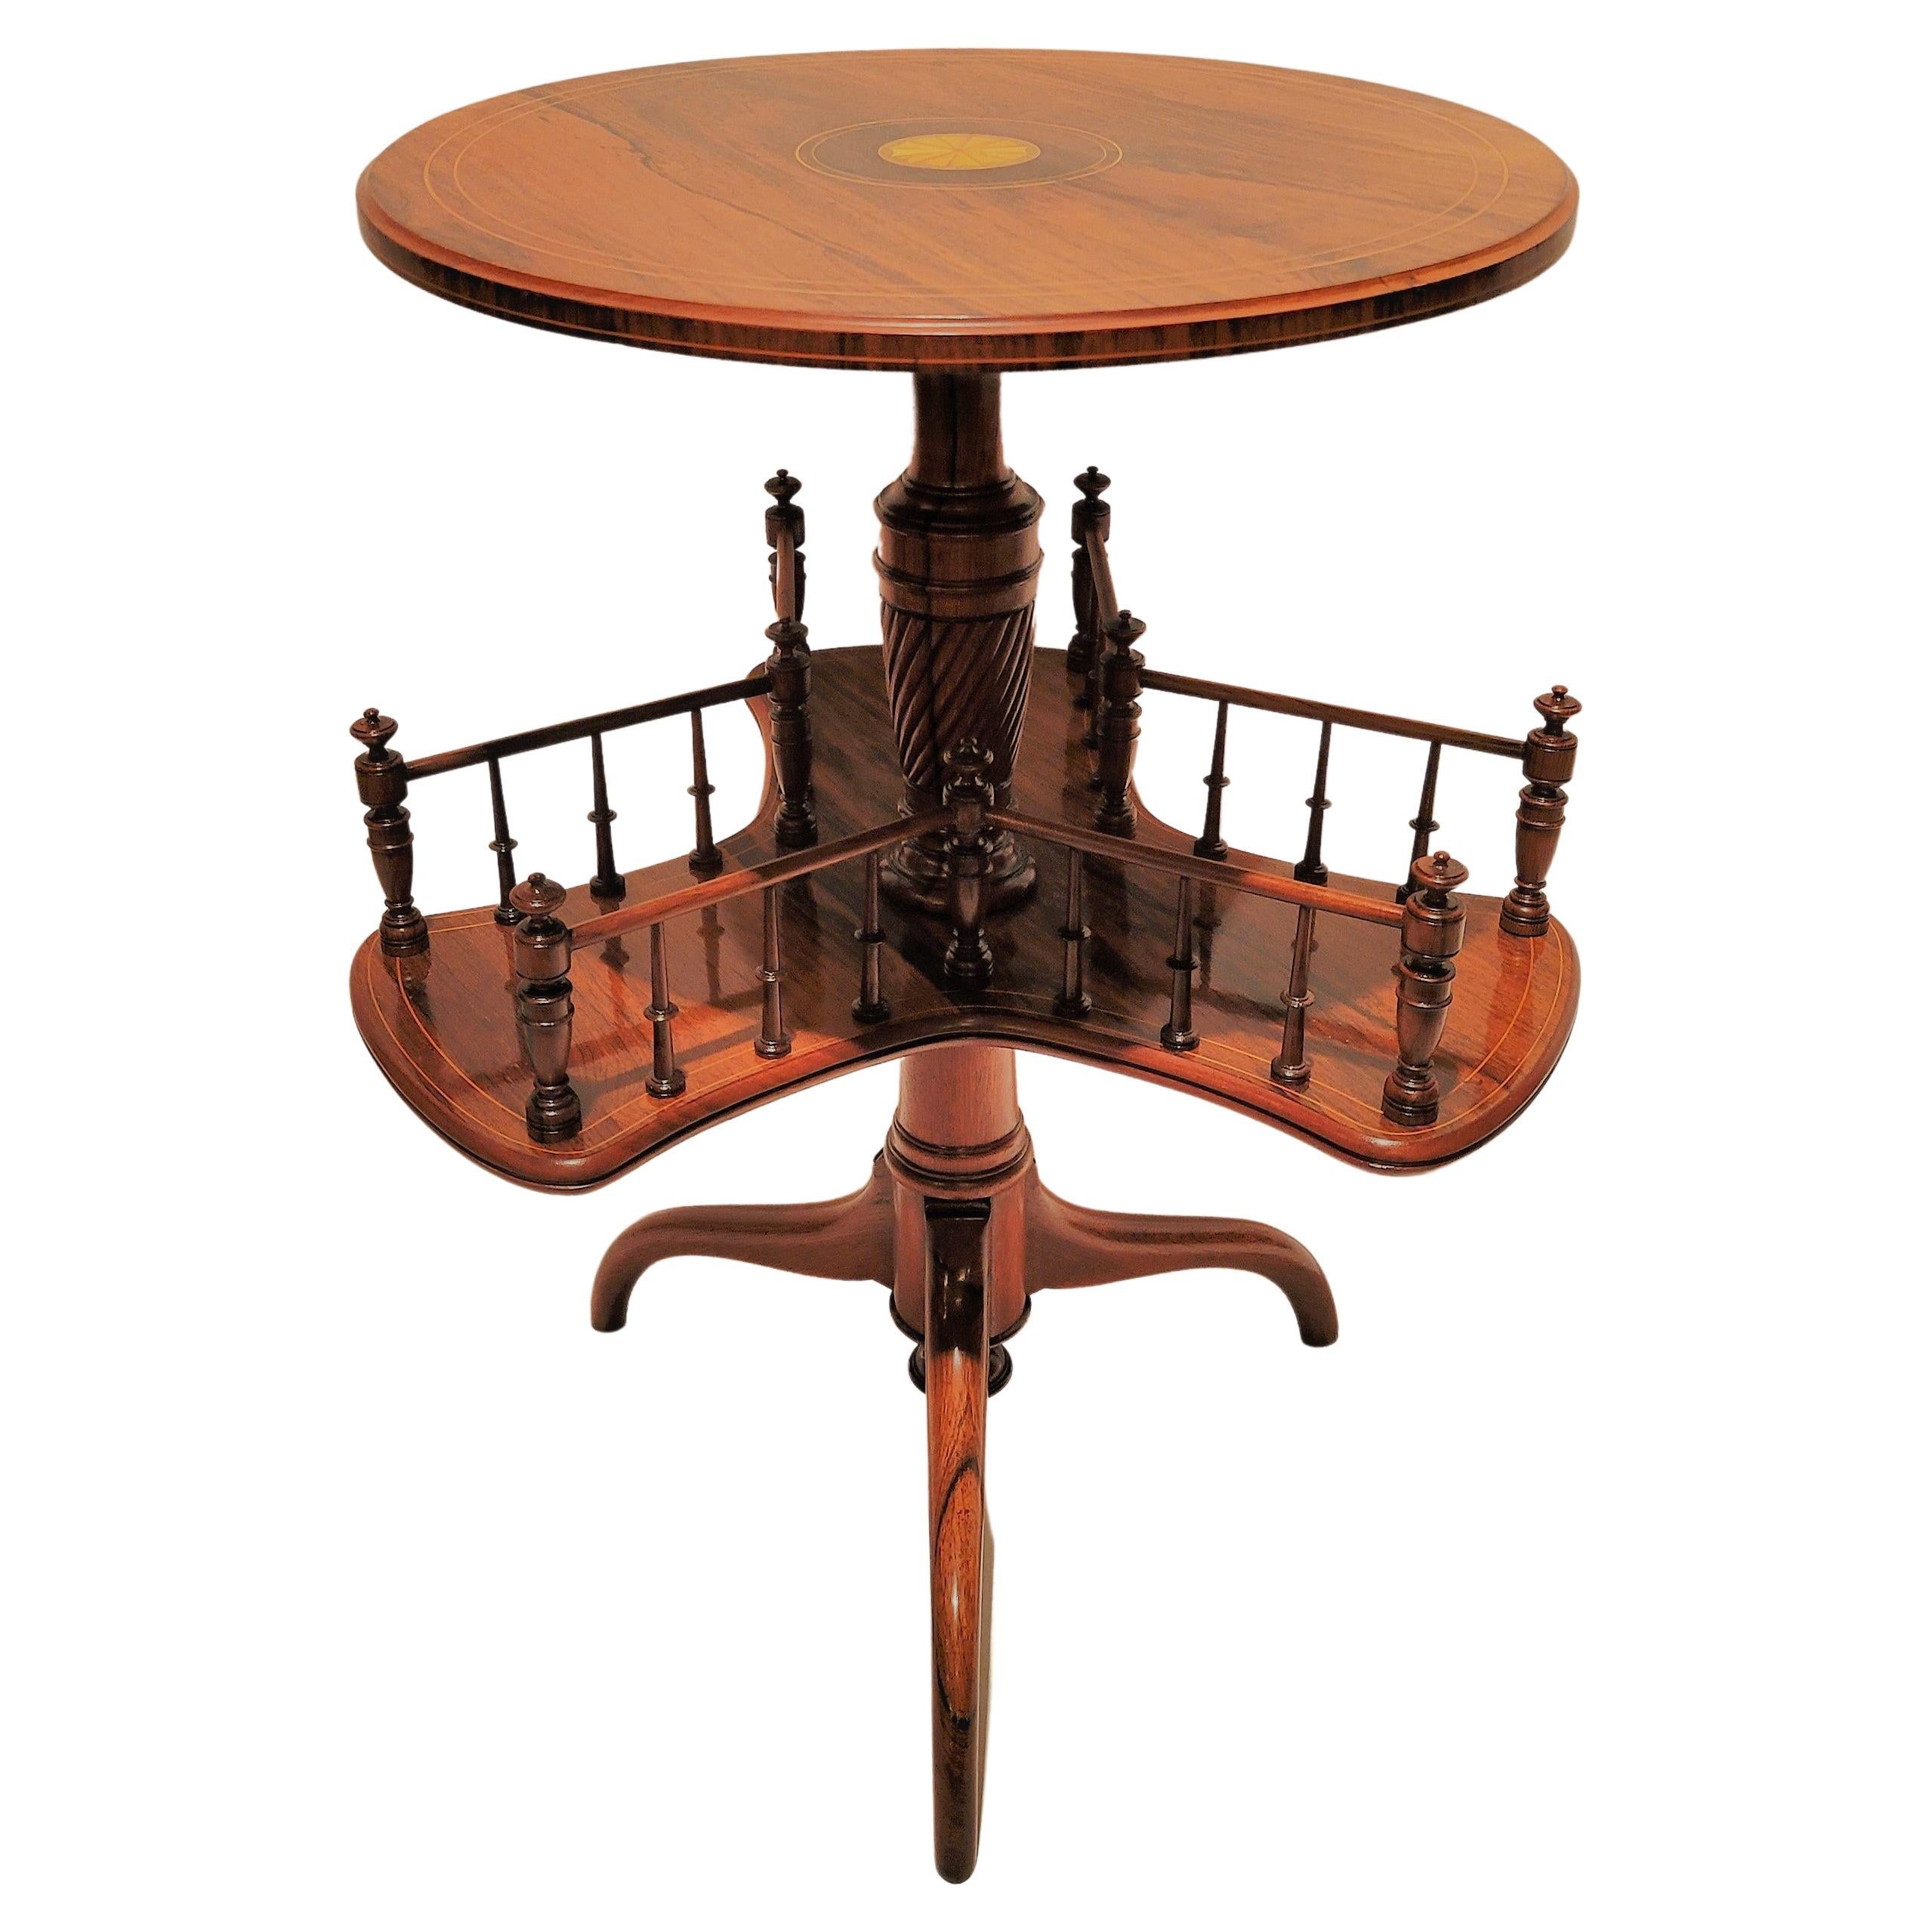 Antique English Revolving Book Table, Rosewood with Inlay circa 1875